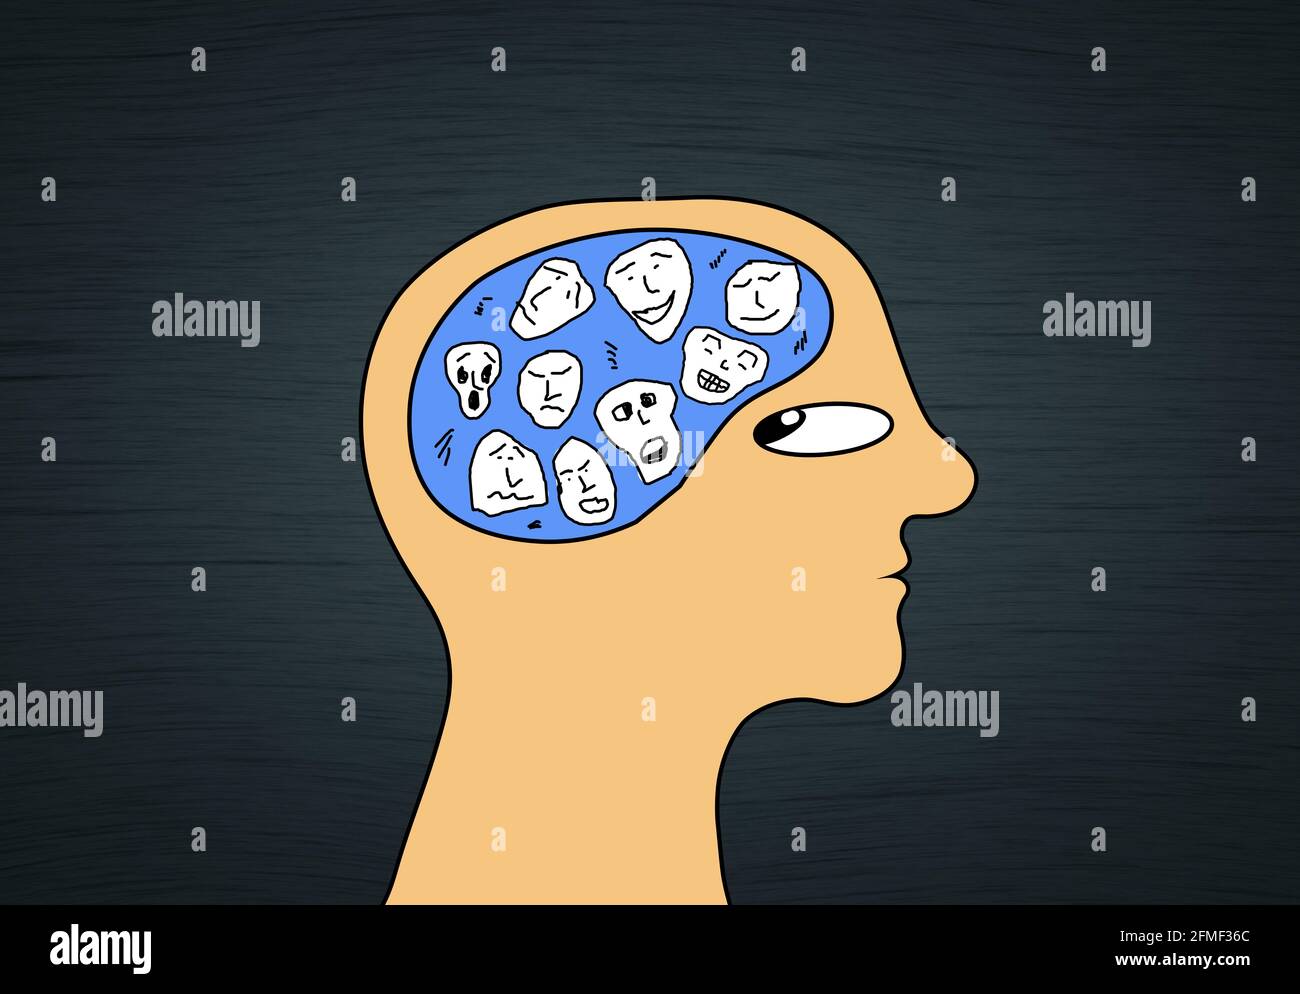 Thinking in others opinion Concept. Paranoid Man head With Funny and scary faces in his mind or brain, thinks inside his brain. Mind psychology, Stock Photo